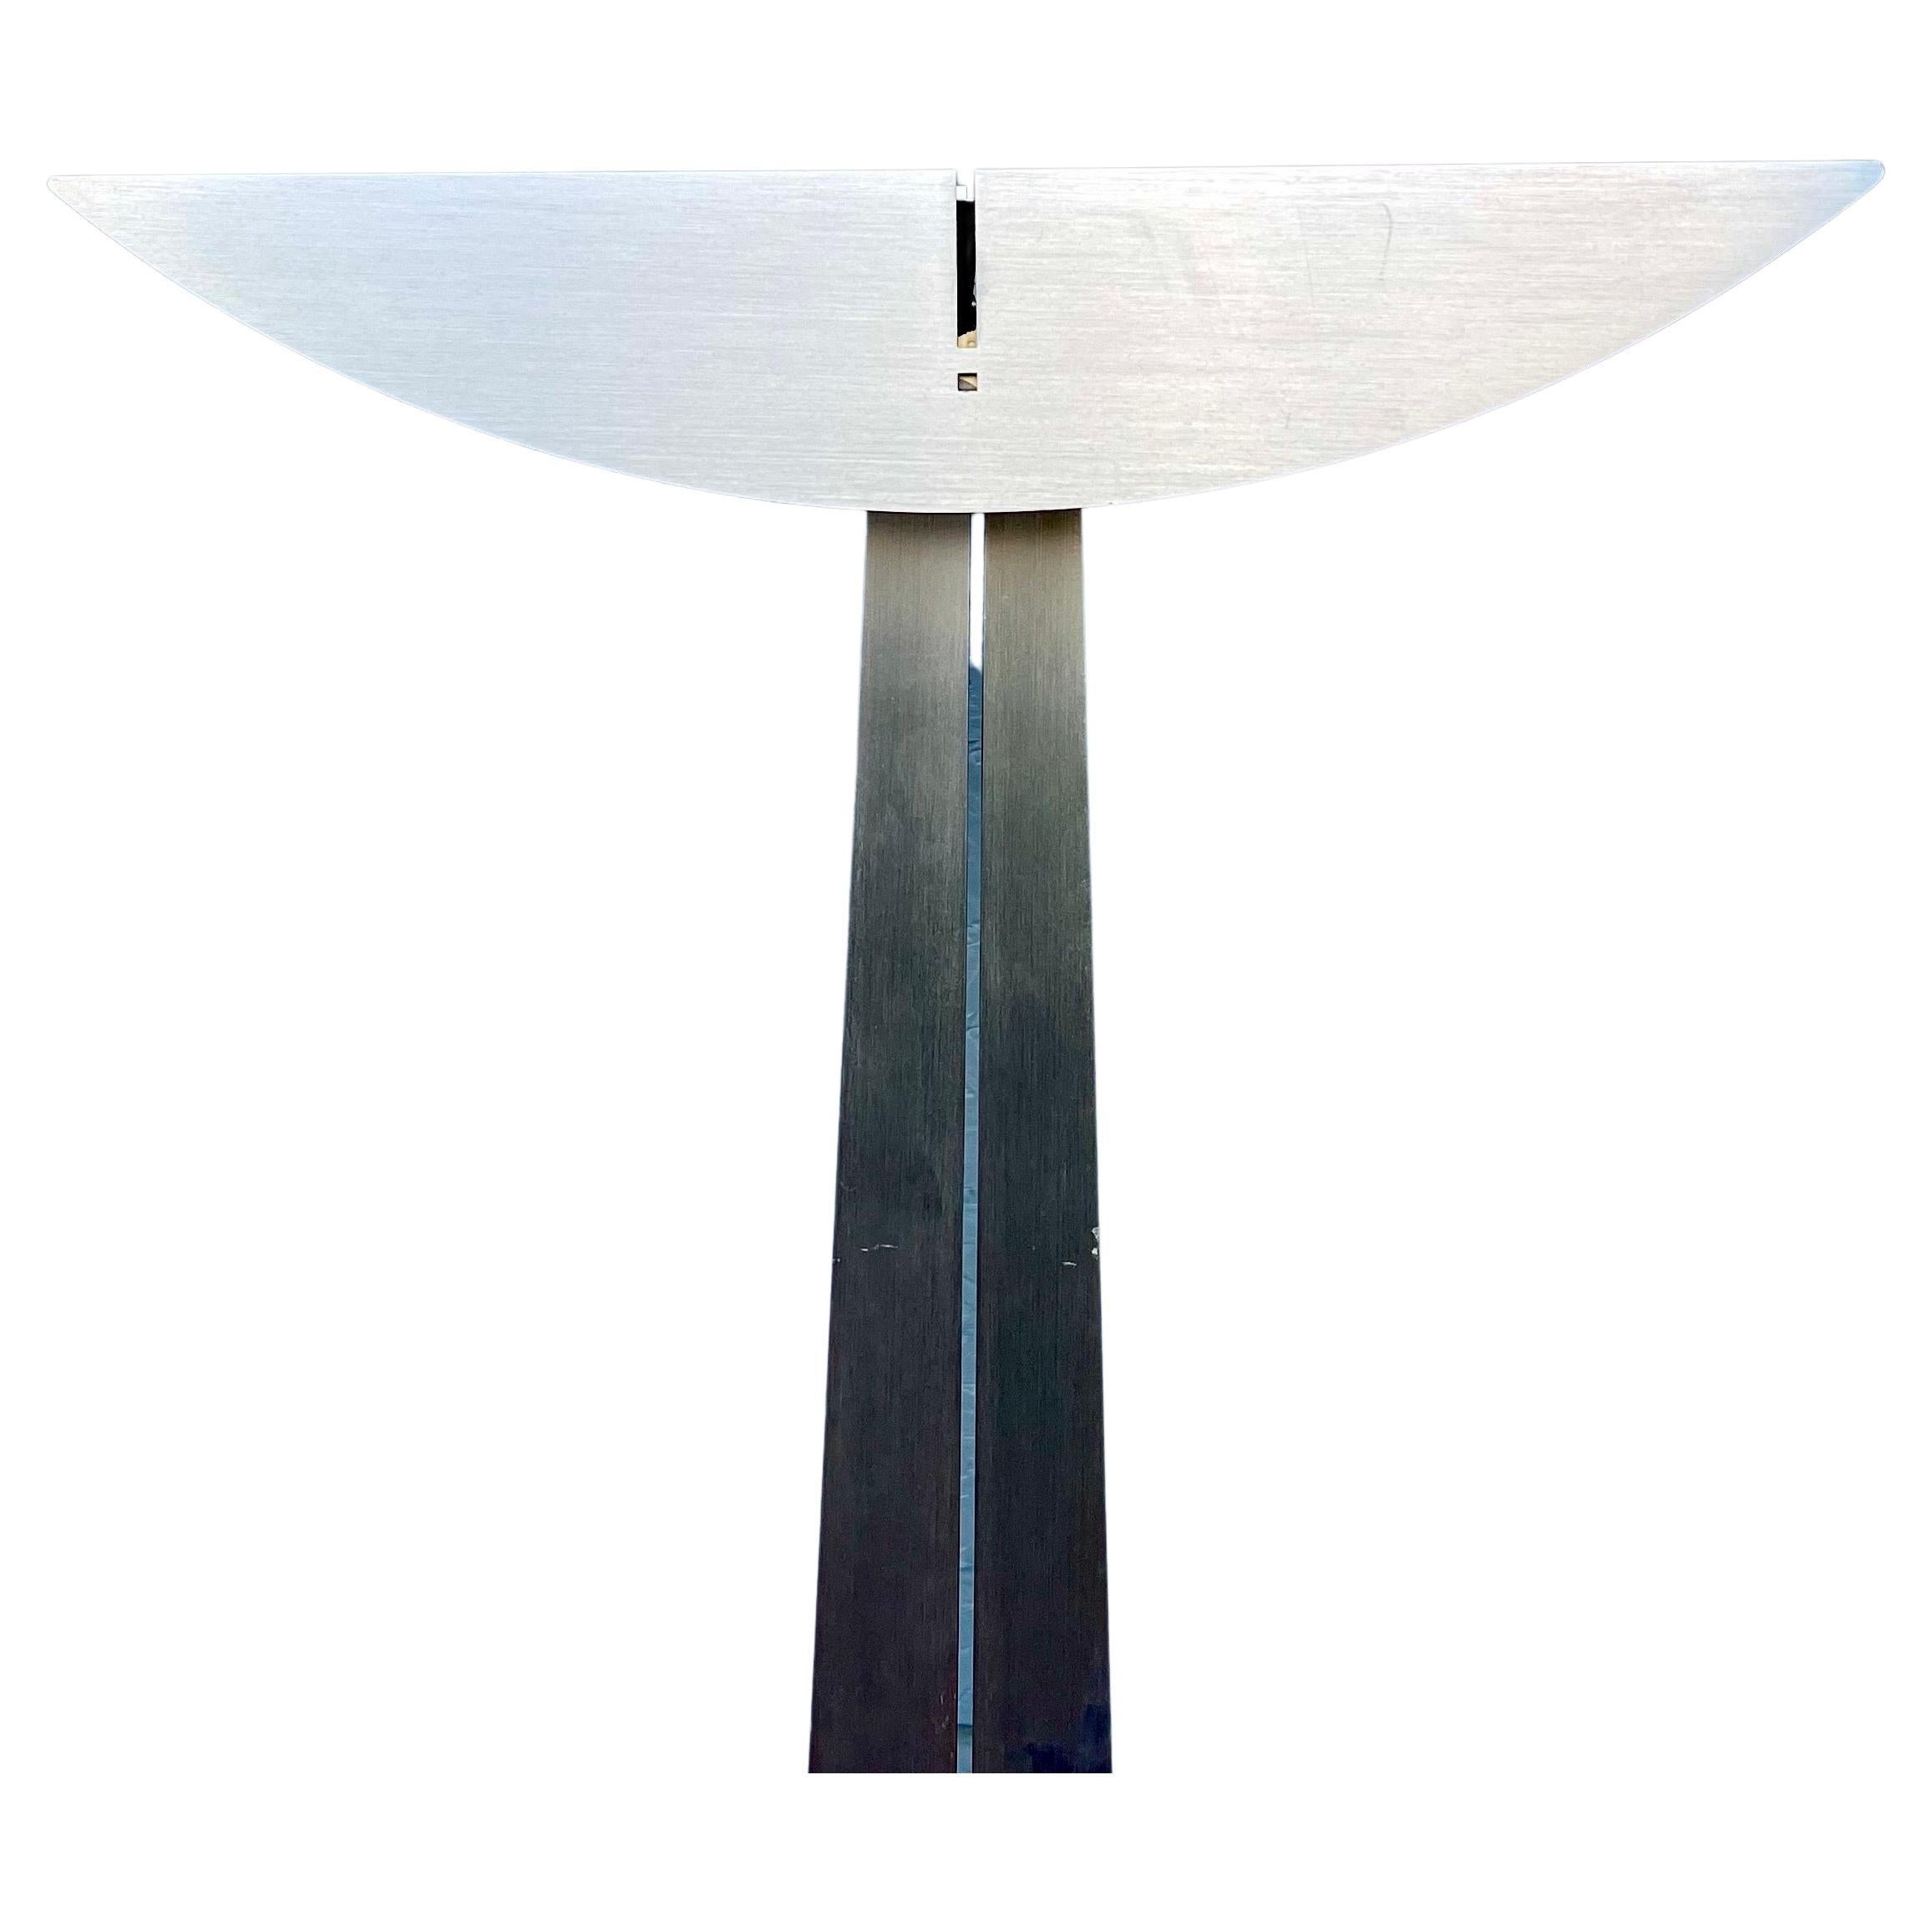 Striking Polished Stainless Steel Torchiere Floor Lamp Designed by Sonneman In Good Condition For Sale In San Diego, CA